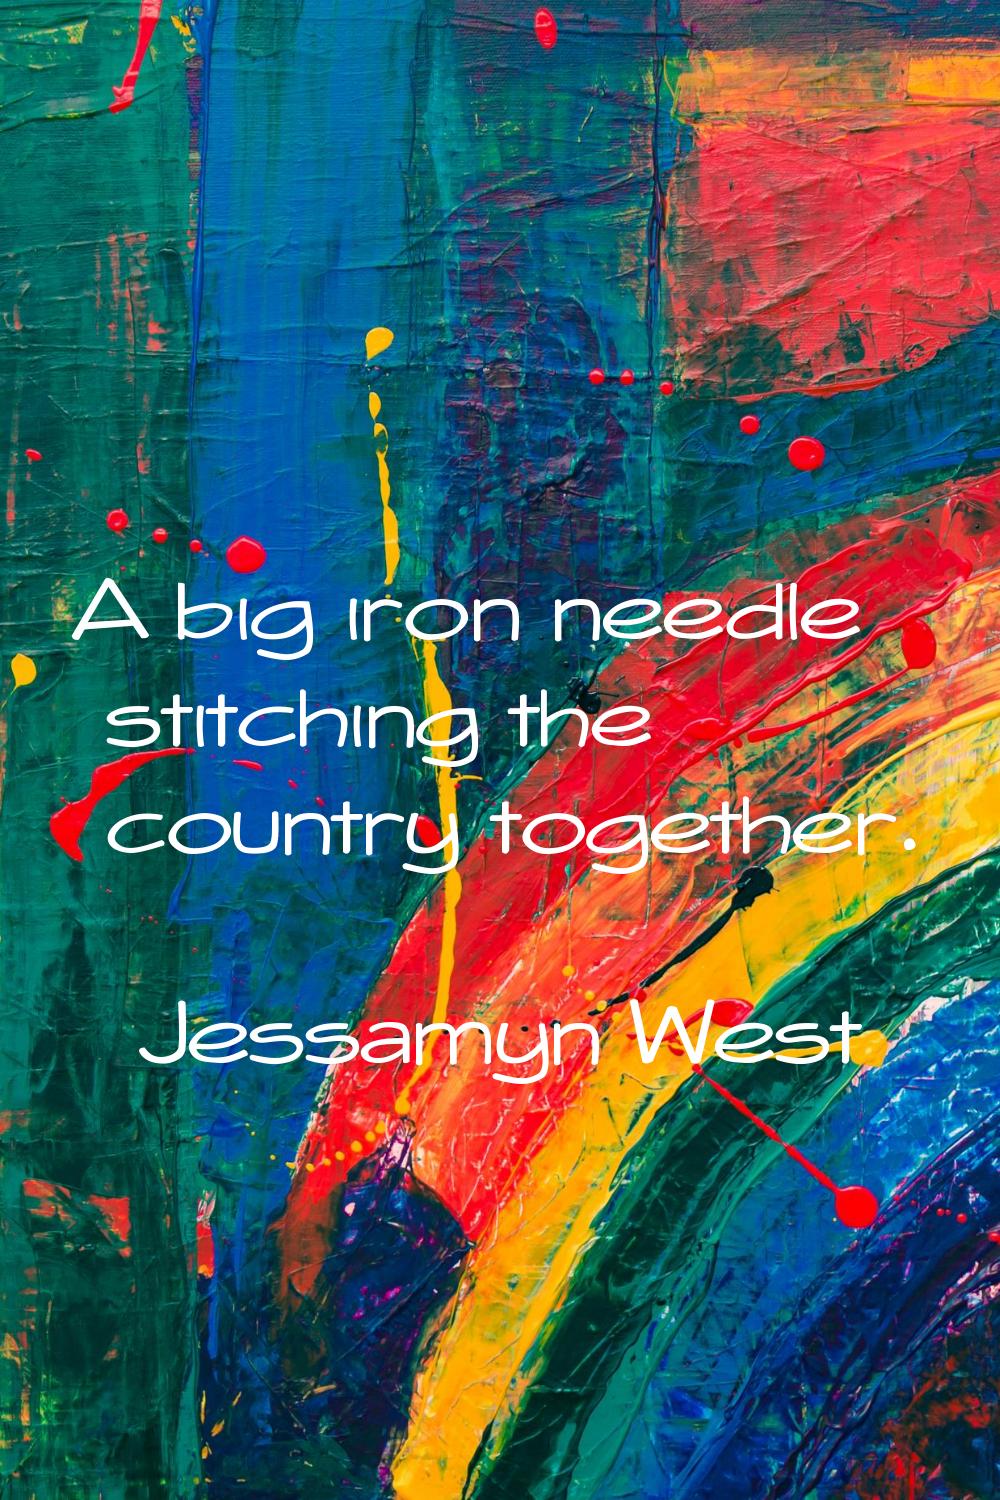 A big iron needle stitching the country together.